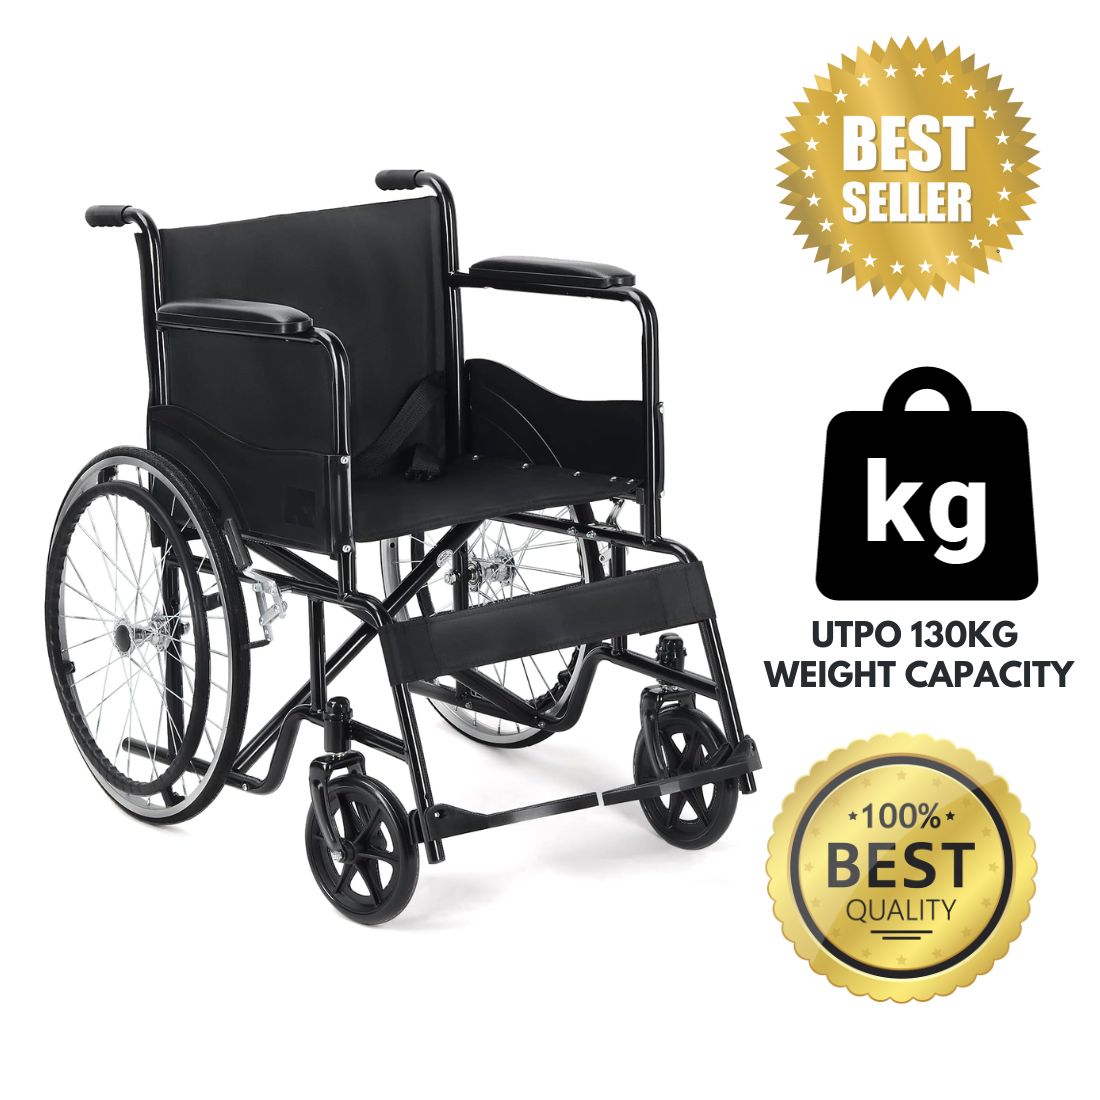 Wheelchair for rent - Foldable Lightweight Wheelchair - Same Day Delivery across Chennai